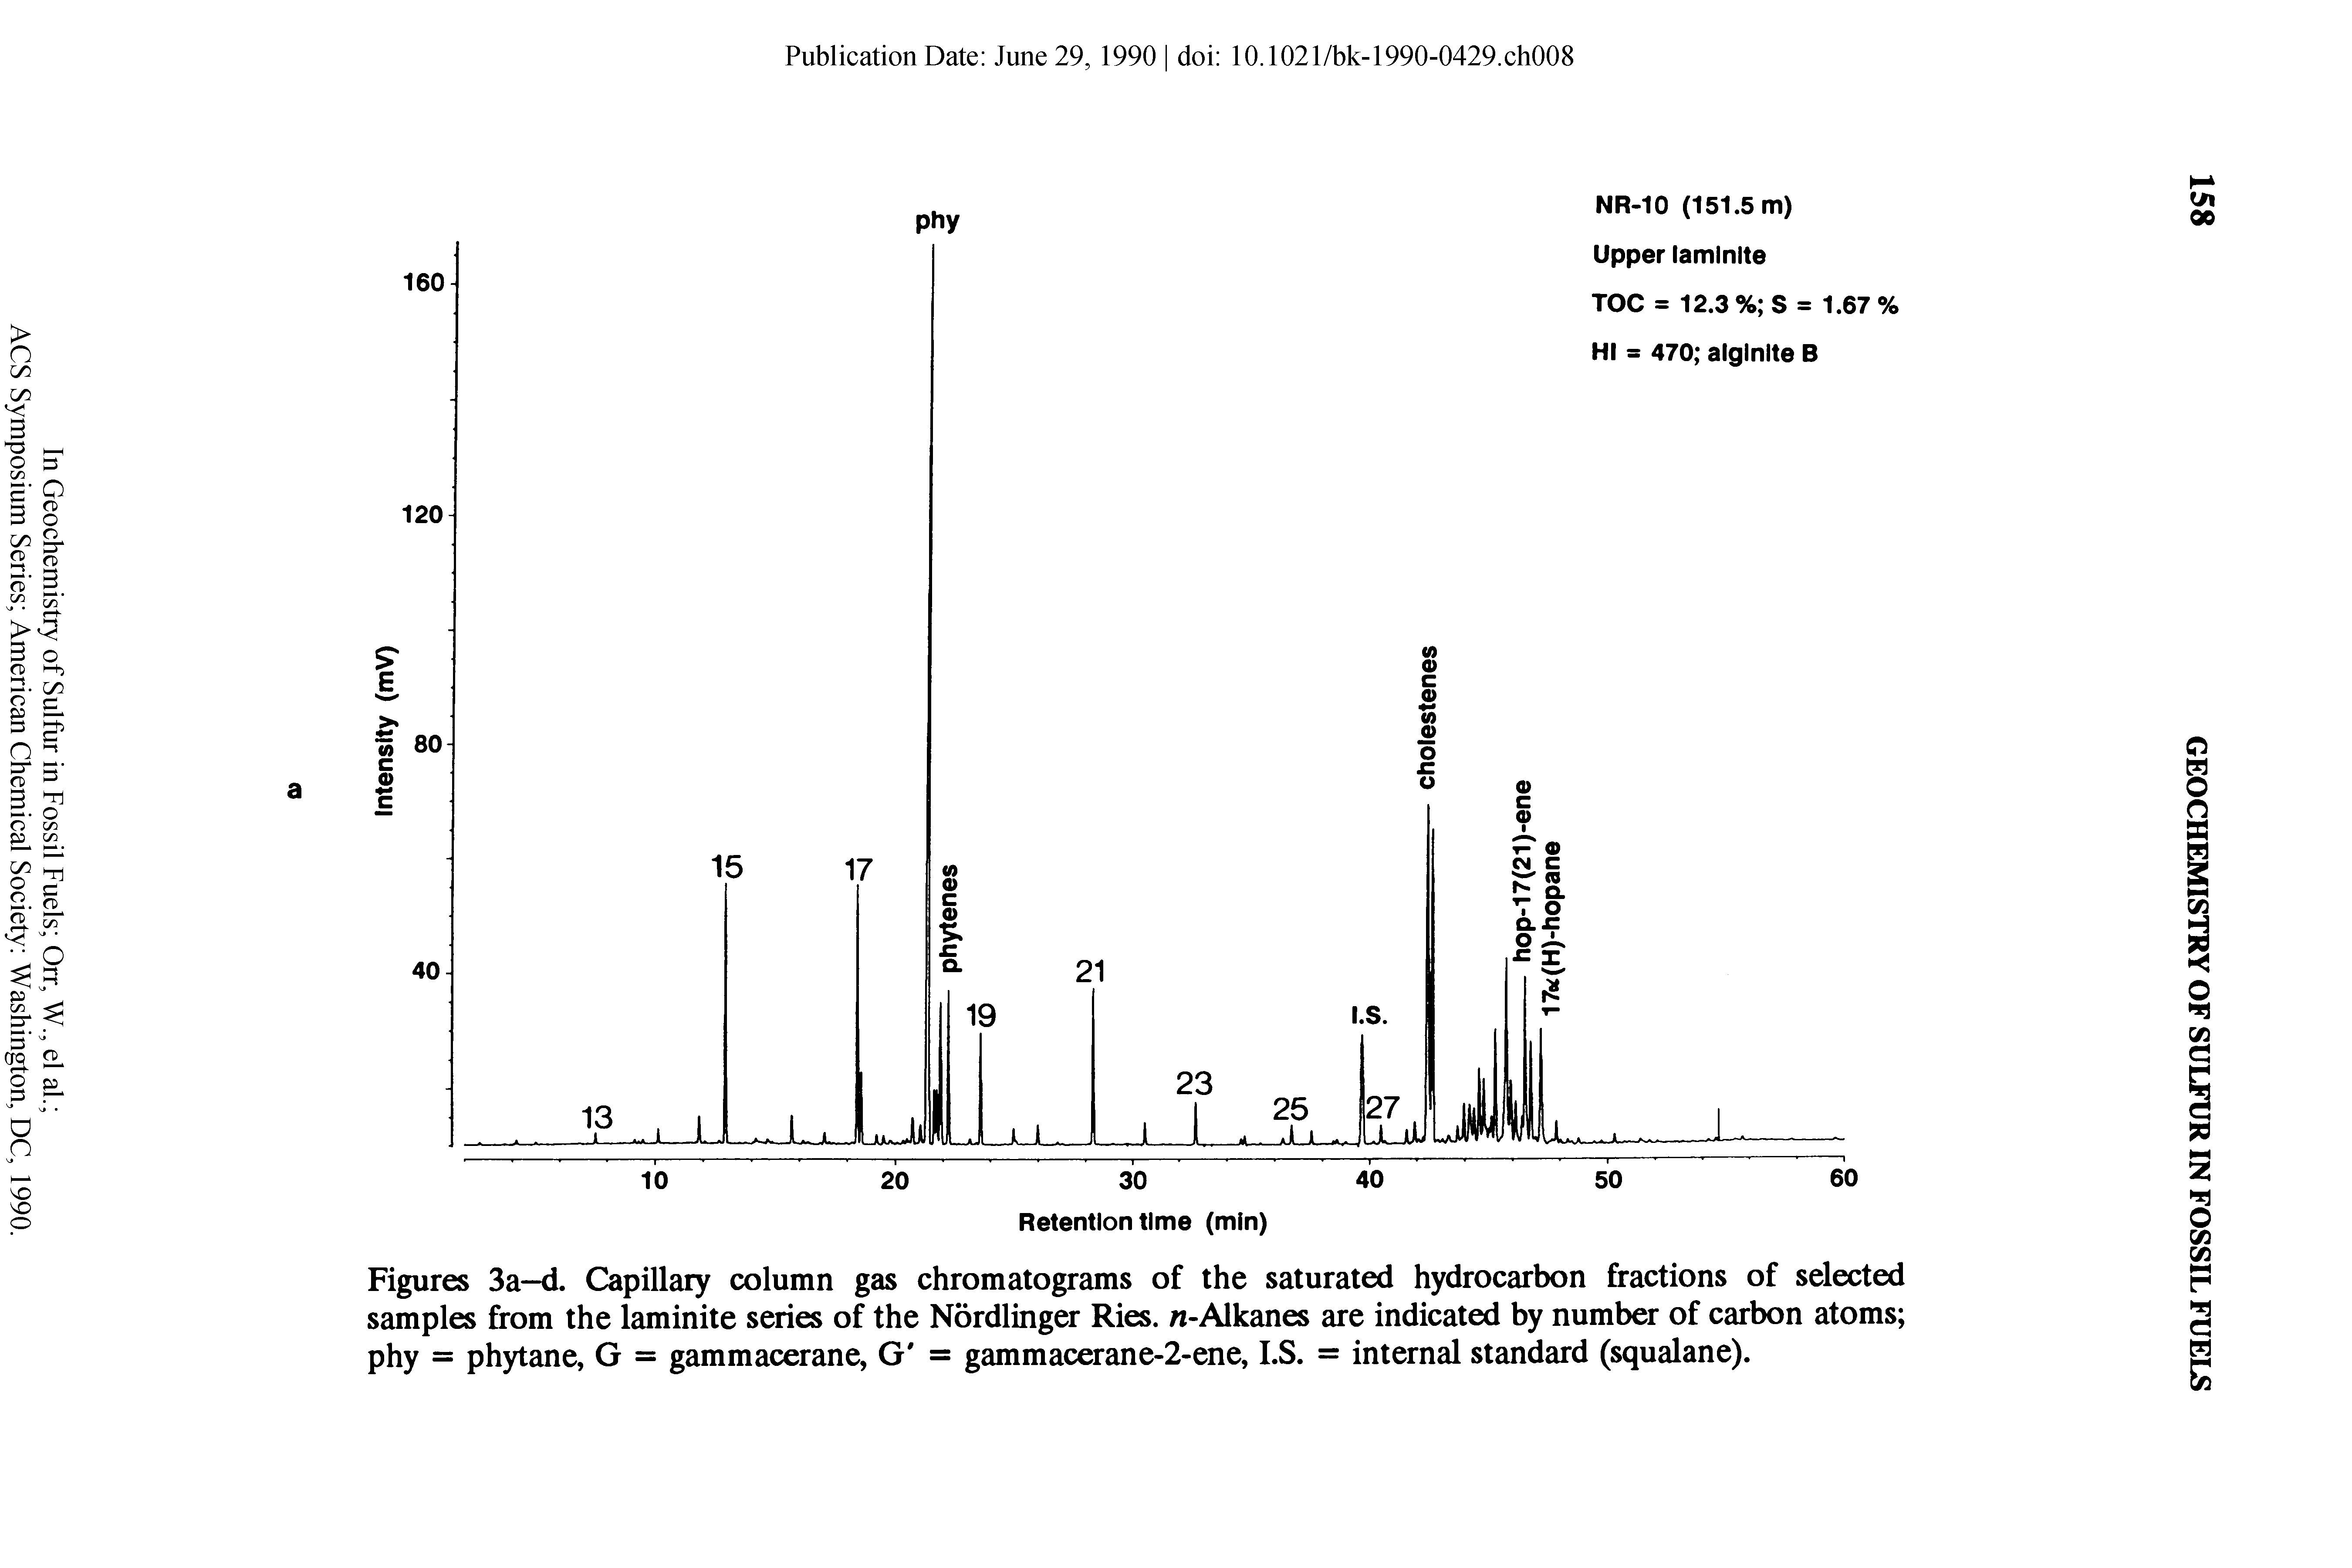 Figures 3a—d. Capillary column gas chromatograms of the saturated hydrocarbon fractions of selected samples from the laminite series of the Nordlinger Ries. n-Alkanes are indicated by number of carbon atoms phy = phytane, G = gammacerane, G = gammacerane-2-ene, I.S. = internal standard (squalane).